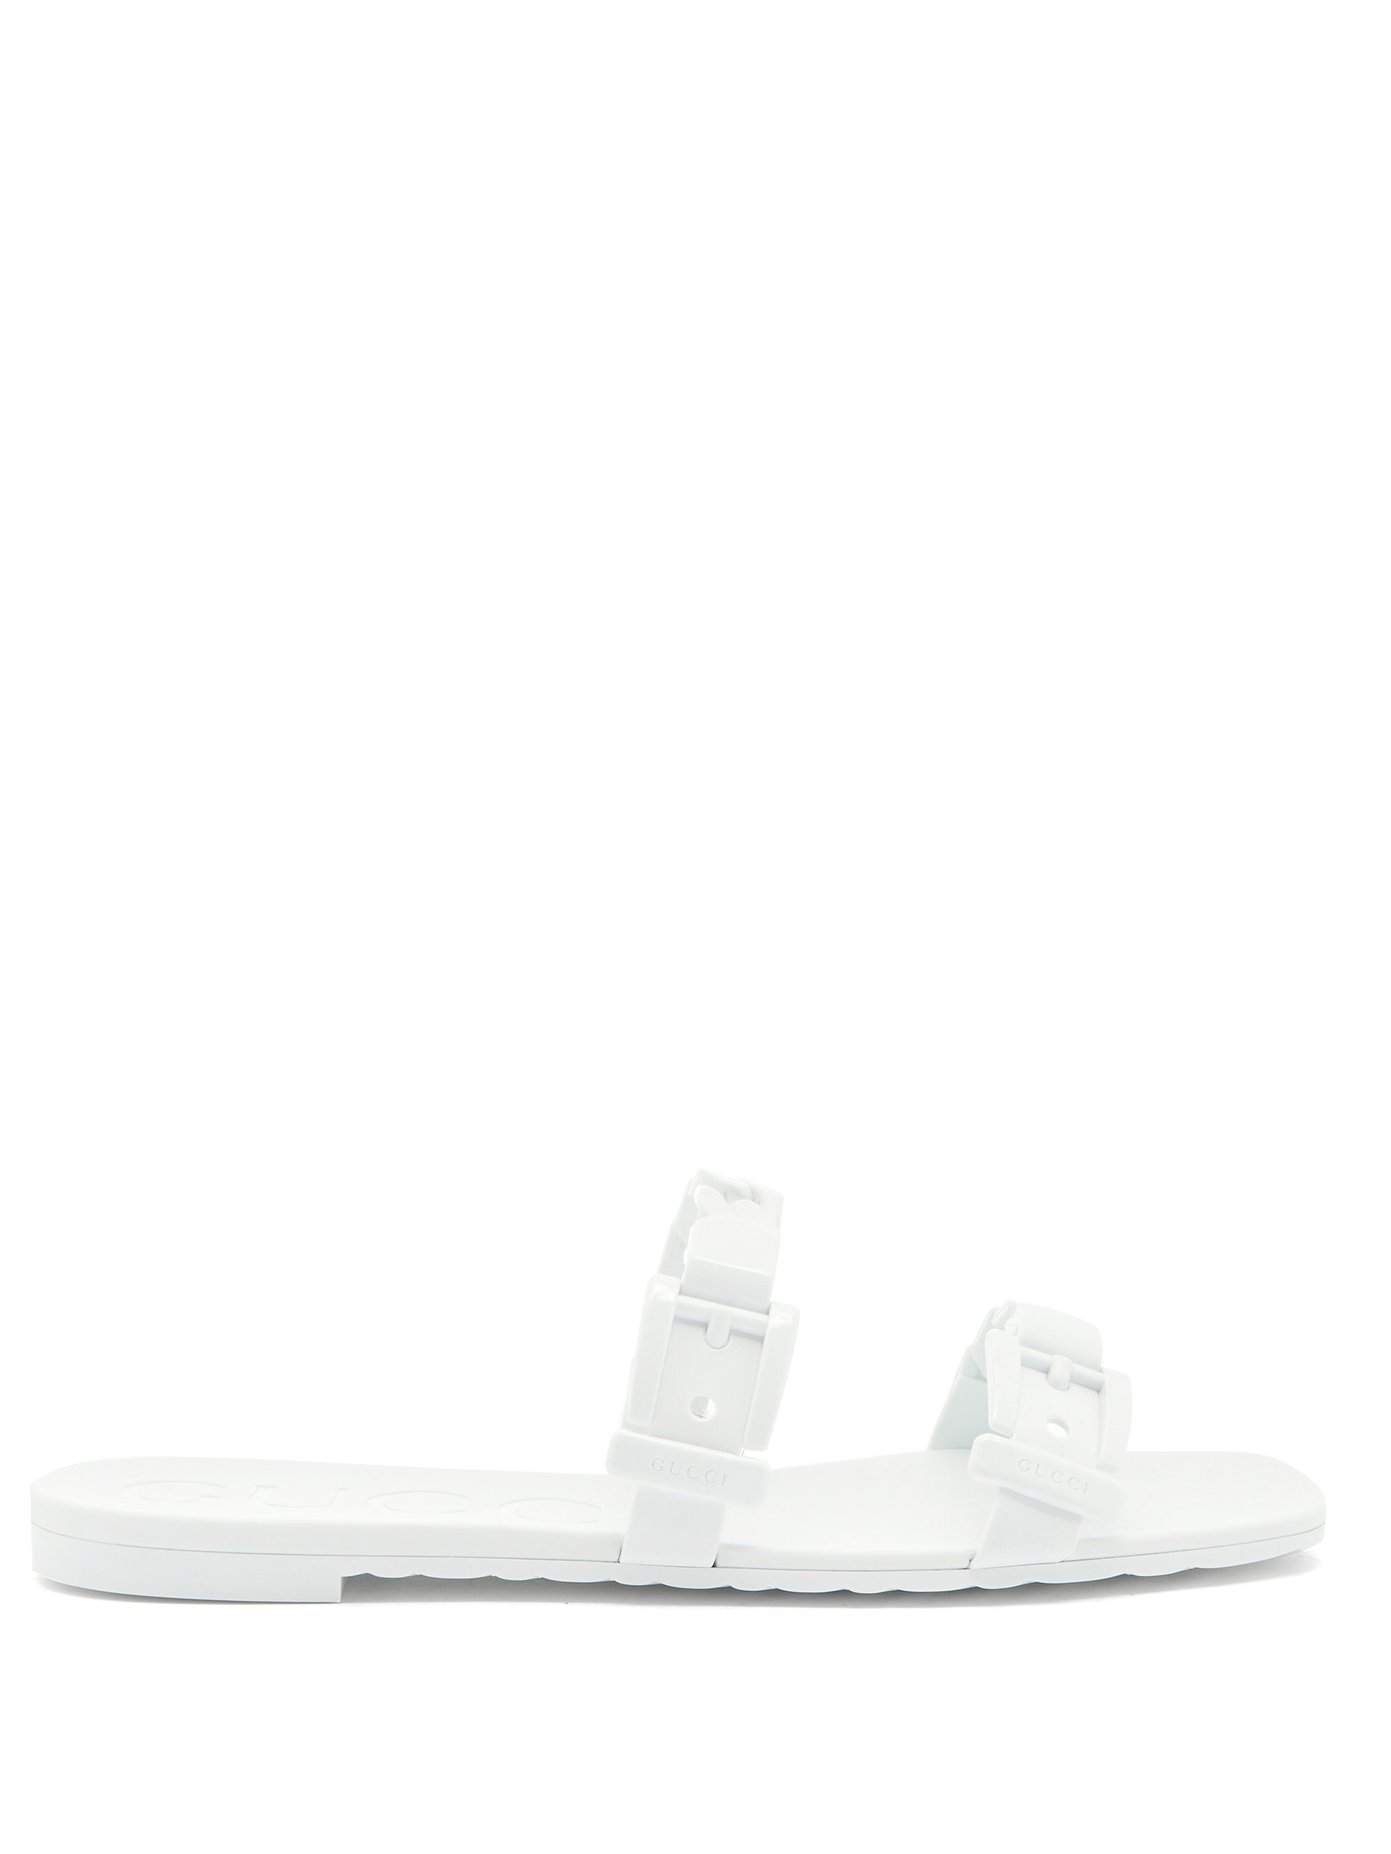 Buckled-strap jelly slides | Gucci 